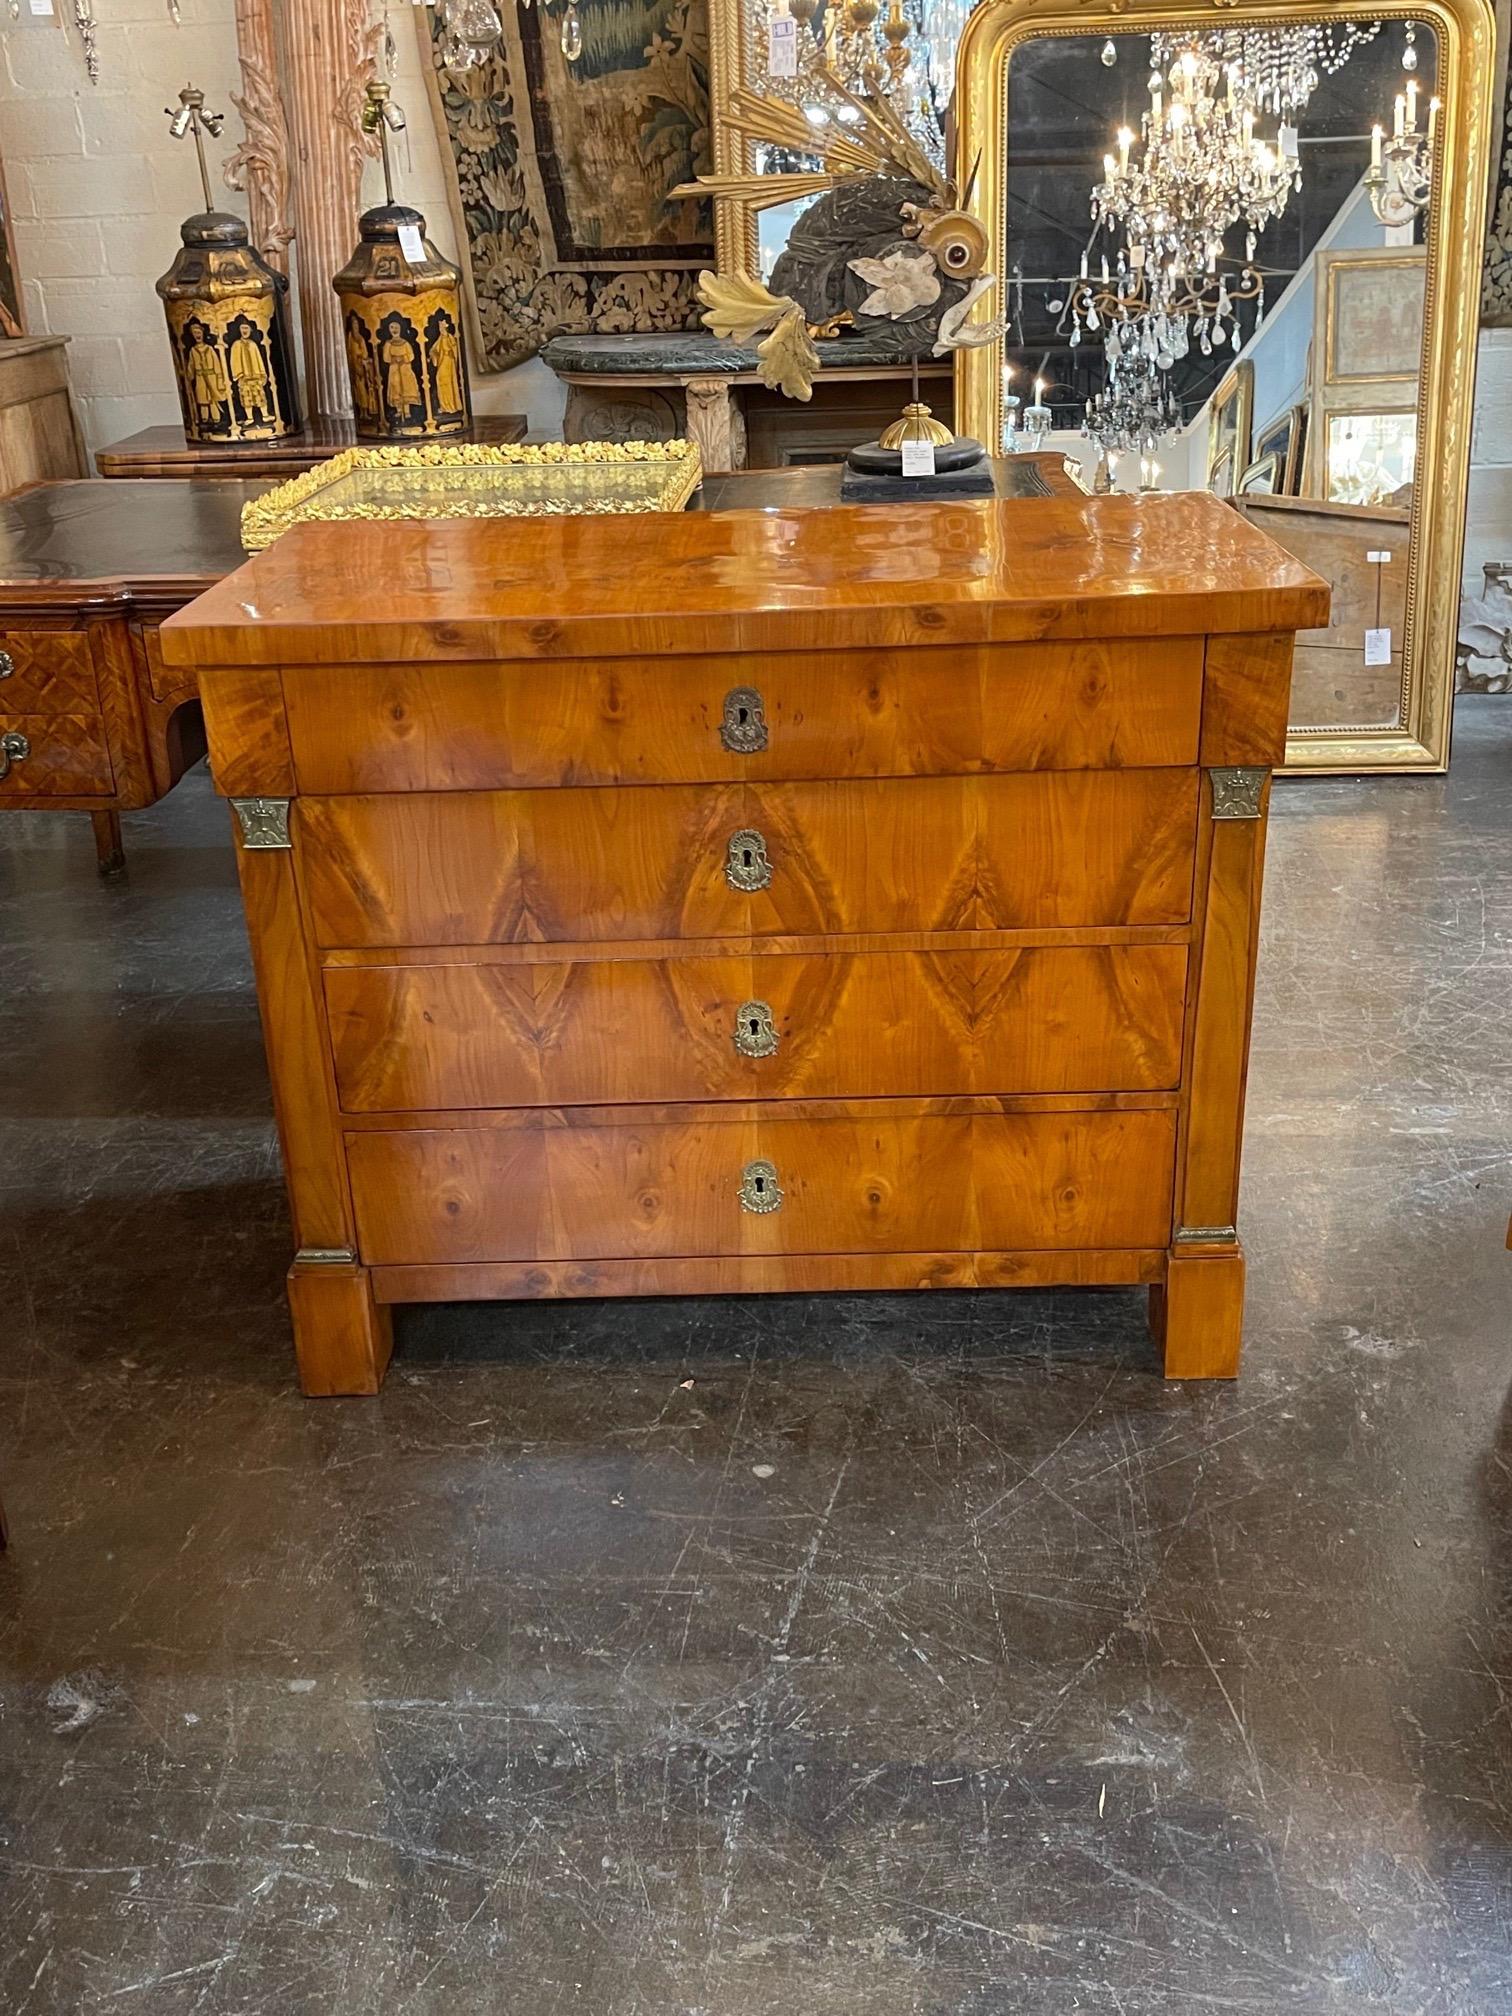 Very fine 19th century Austrian Empire walnut commode. Exceptional wood finish and superb quality. A truly elegant piece that is sure to impress!.